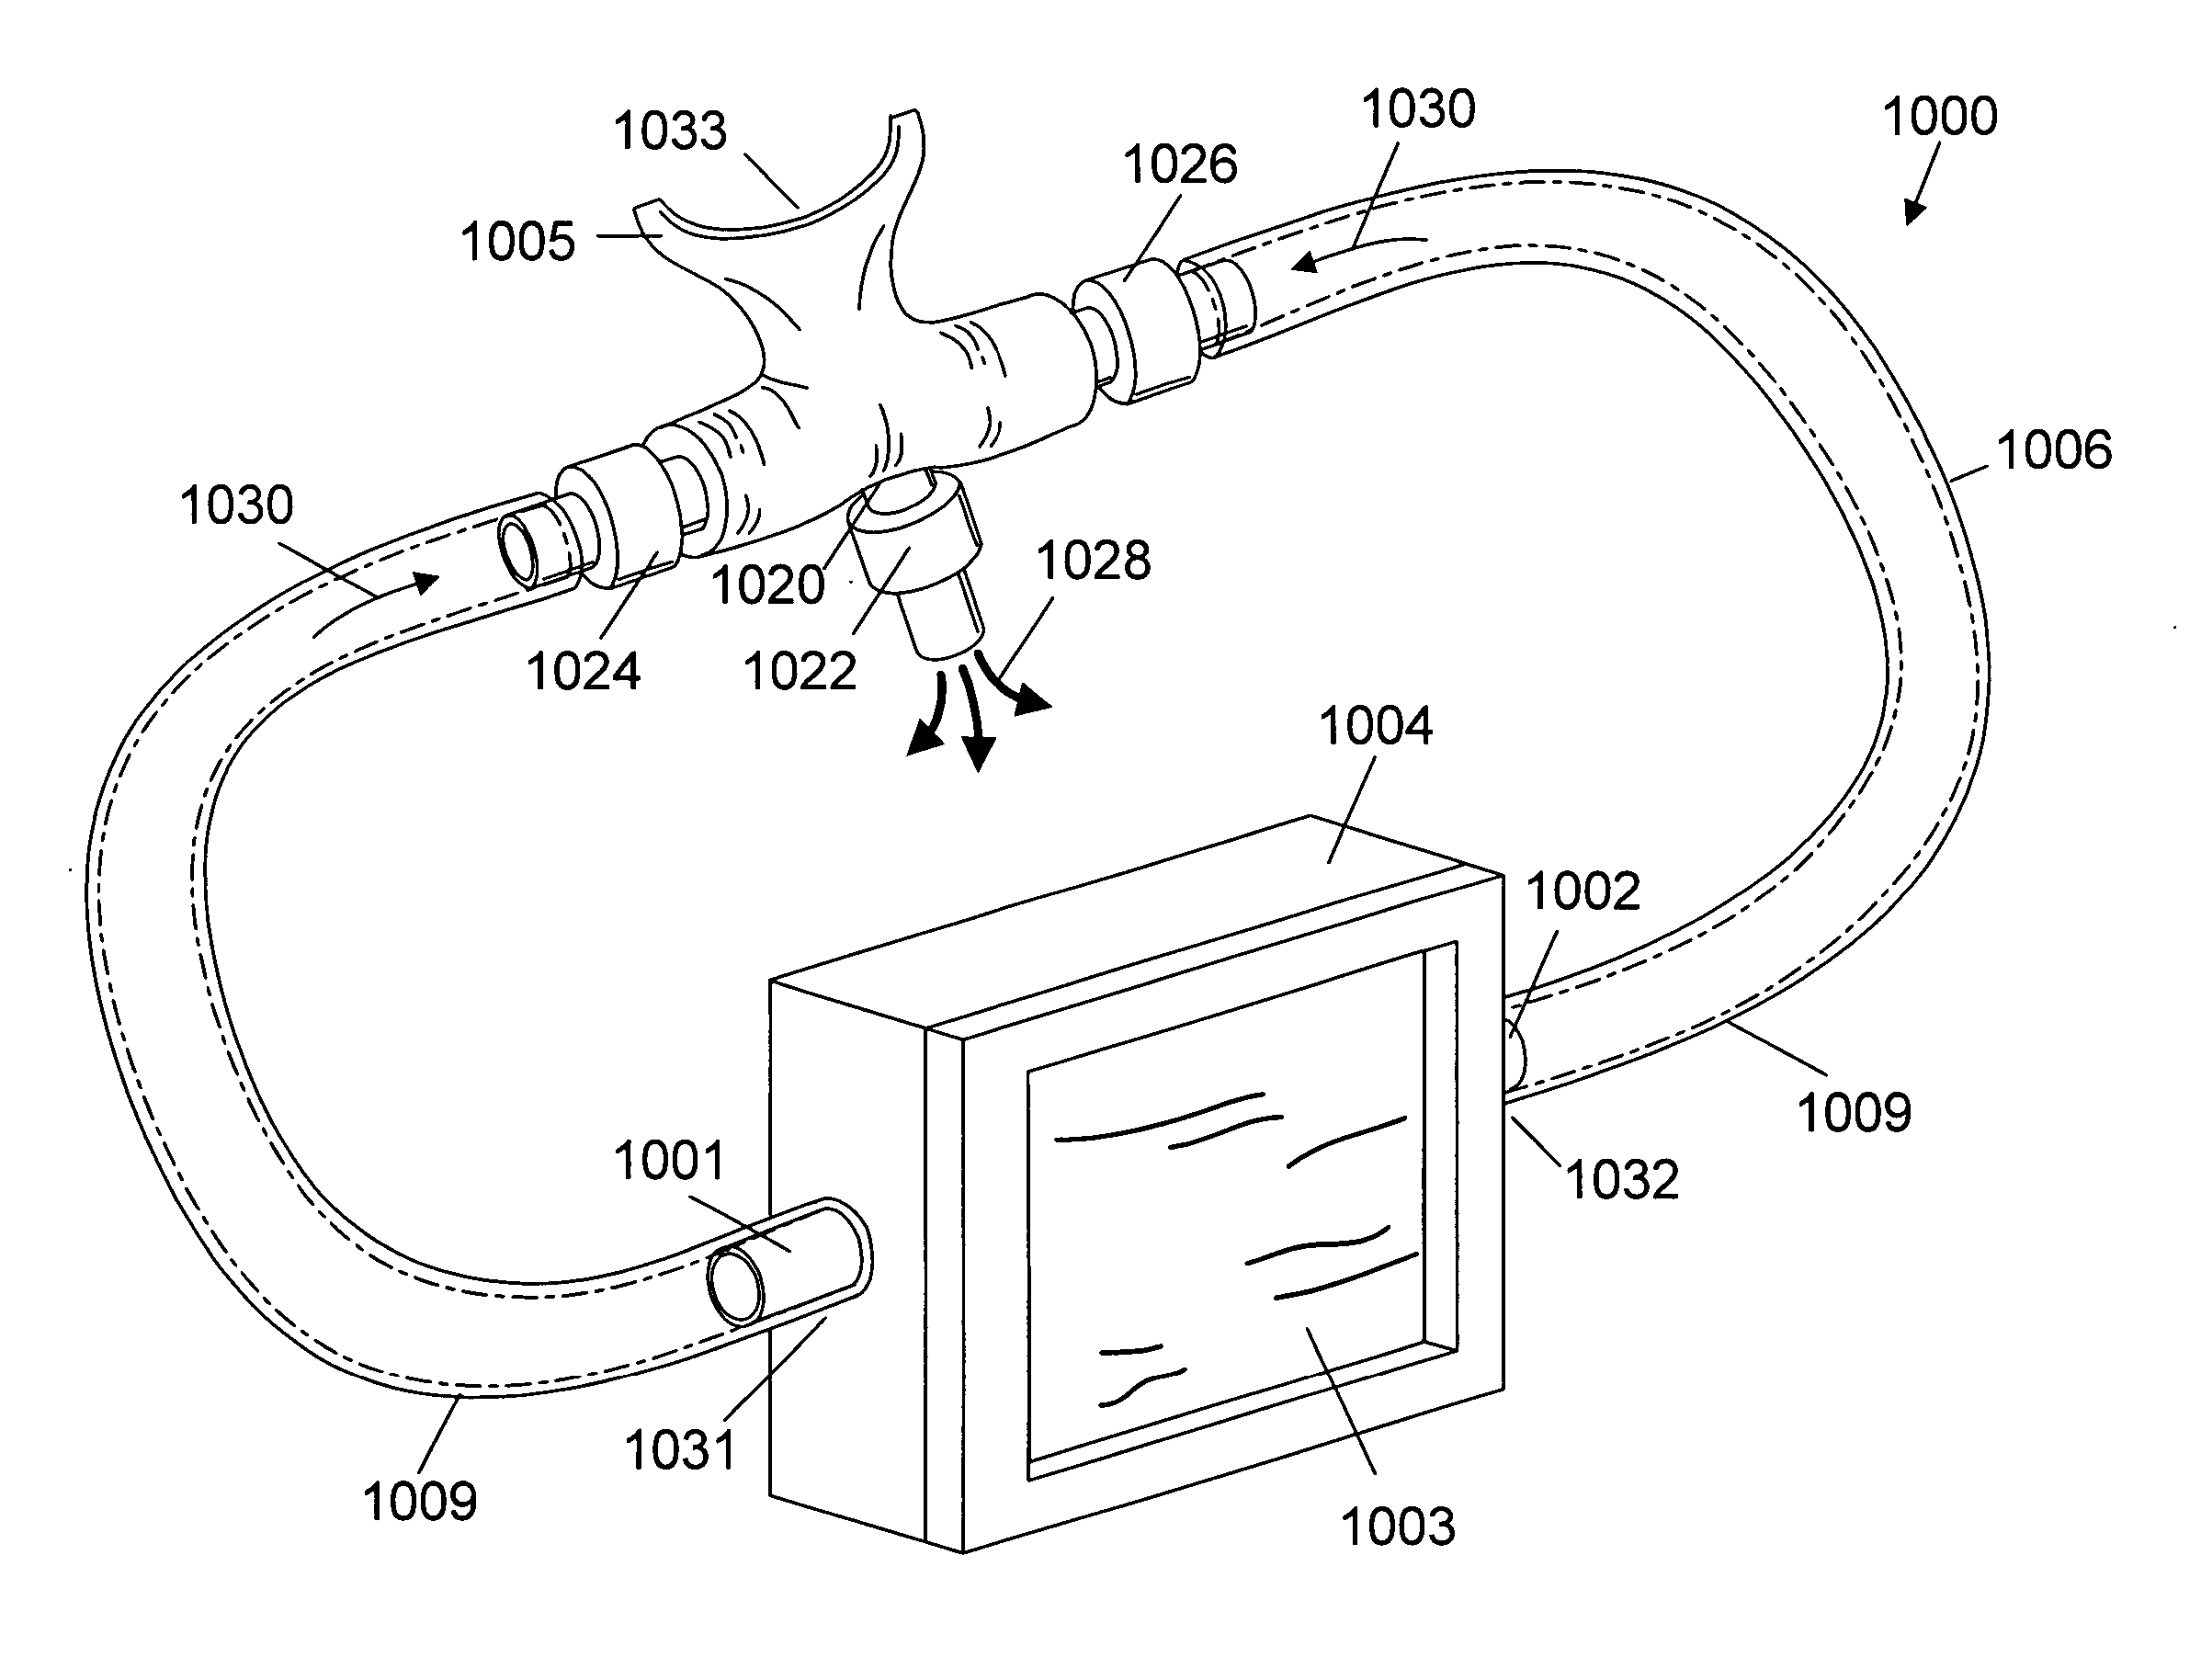 Oral respirator device and method for mask-free filtering of particulates from breathed air